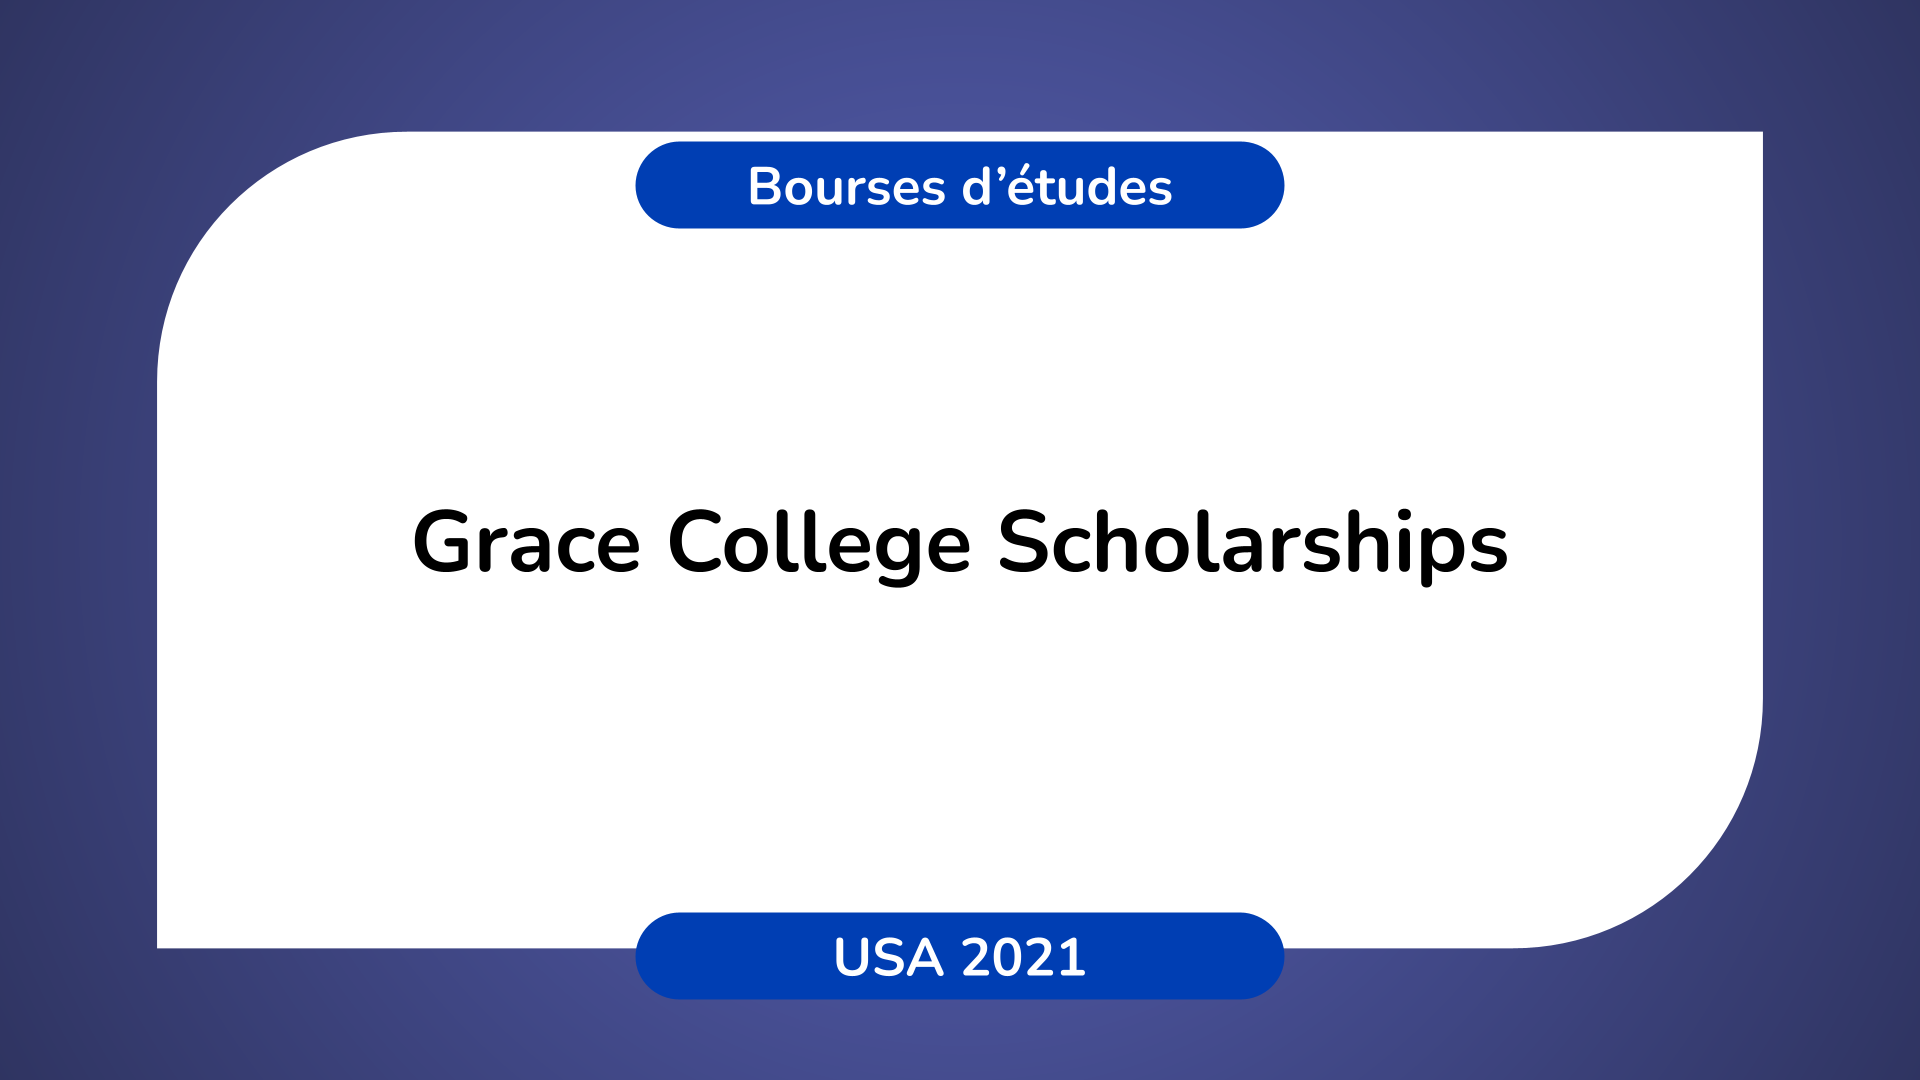 Apply to Grace College Scholarships in the USA in 2021